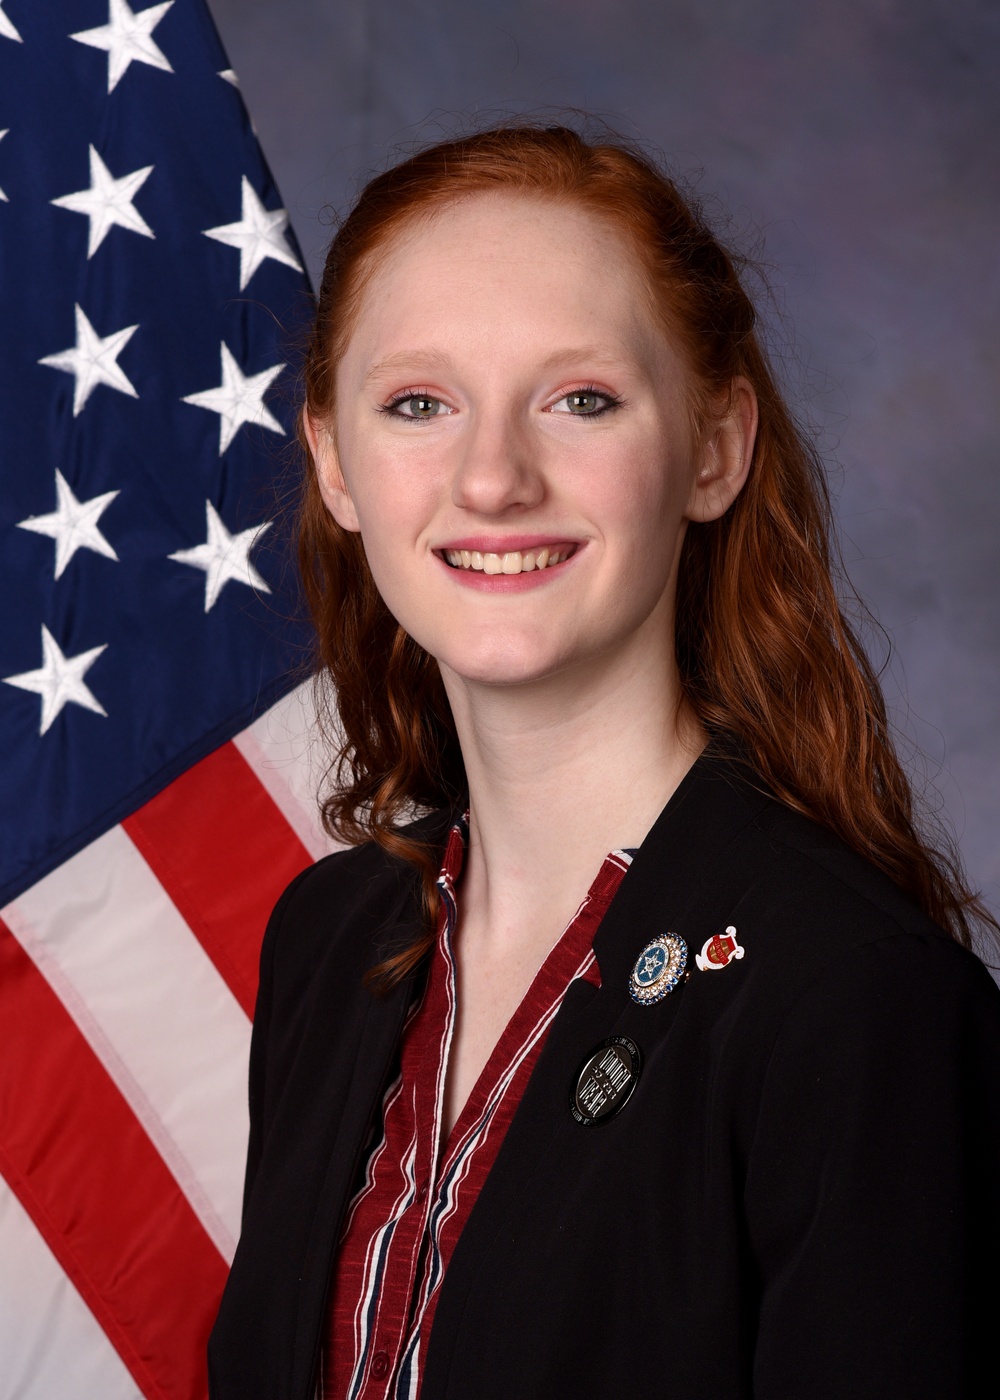 97 AMW teen recognized as Youth of the Year